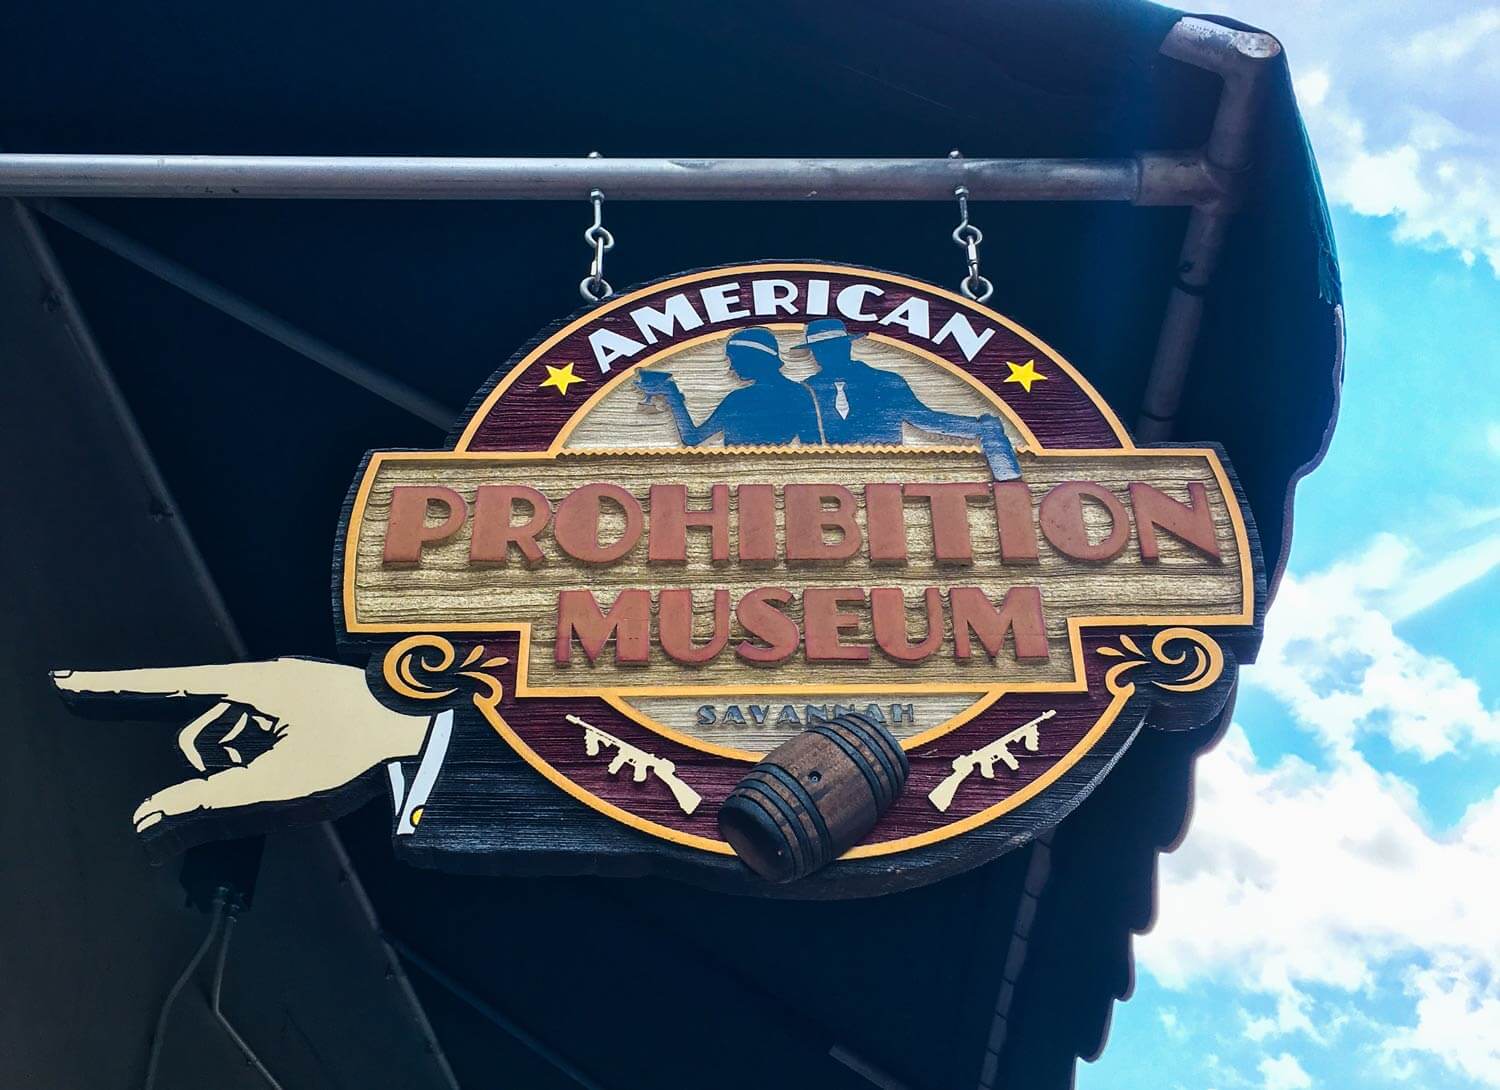 American Prohibition Museum sign